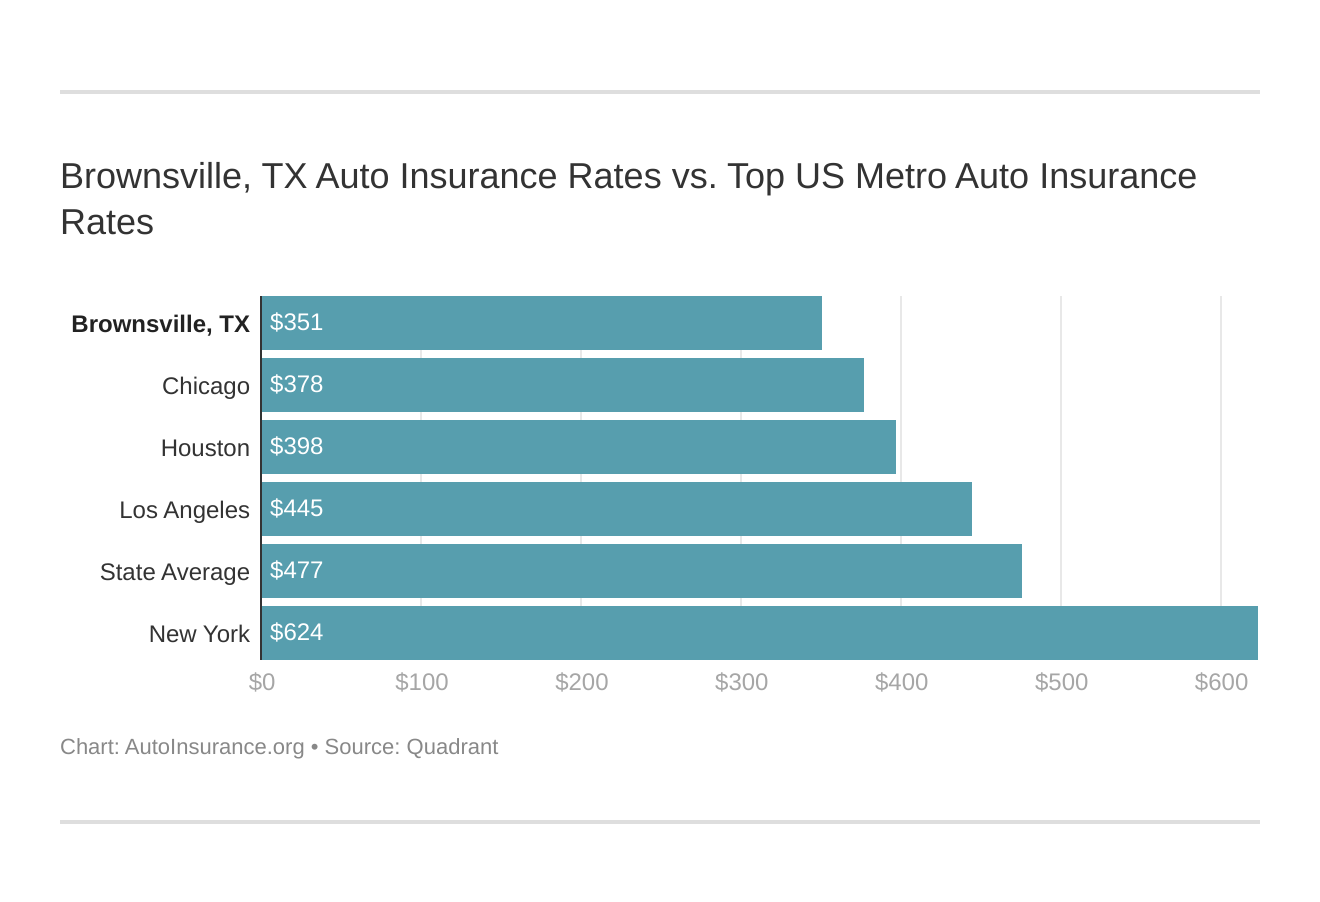 Brownsville, TX Auto Insurance Rates vs. Top US Metro Auto Insurance Rates